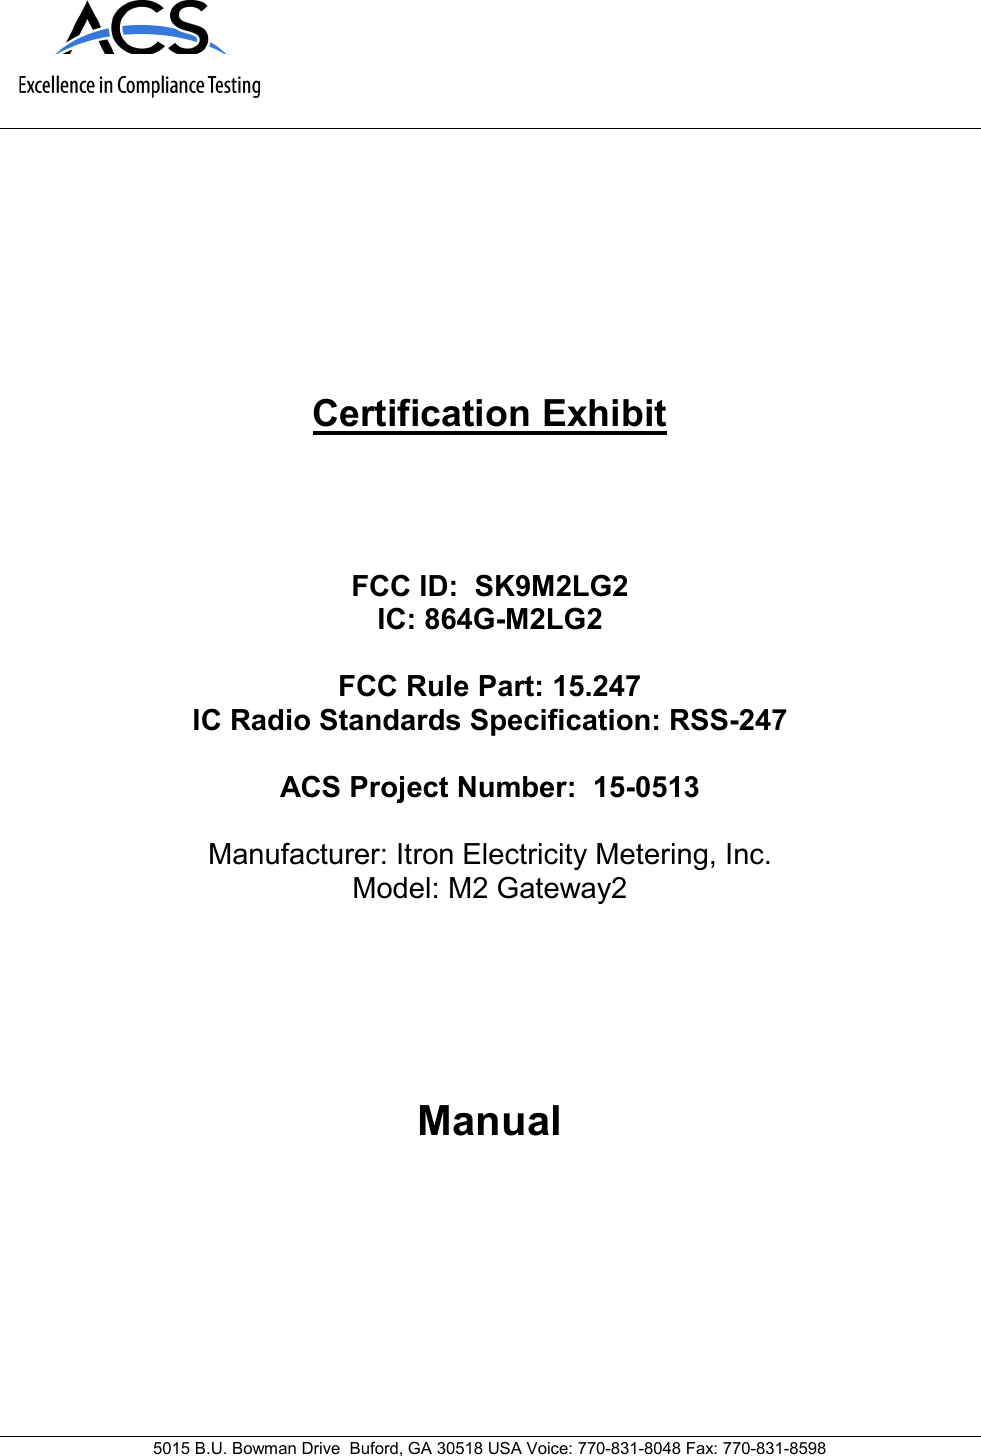      5015 B.U. Bowman Drive  Buford, GA 30518 USA Voice: 770-831-8048 Fax: 770-831-8598   Certification Exhibit     FCC ID:  SK9M2LG2 IC: 864G-M2LG2  FCC Rule Part: 15.247 IC Radio Standards Specification: RSS-247  ACS Project Number:  15-0513   Manufacturer: Itron Electricity Metering, Inc. Model: M2 Gateway2     Manual   